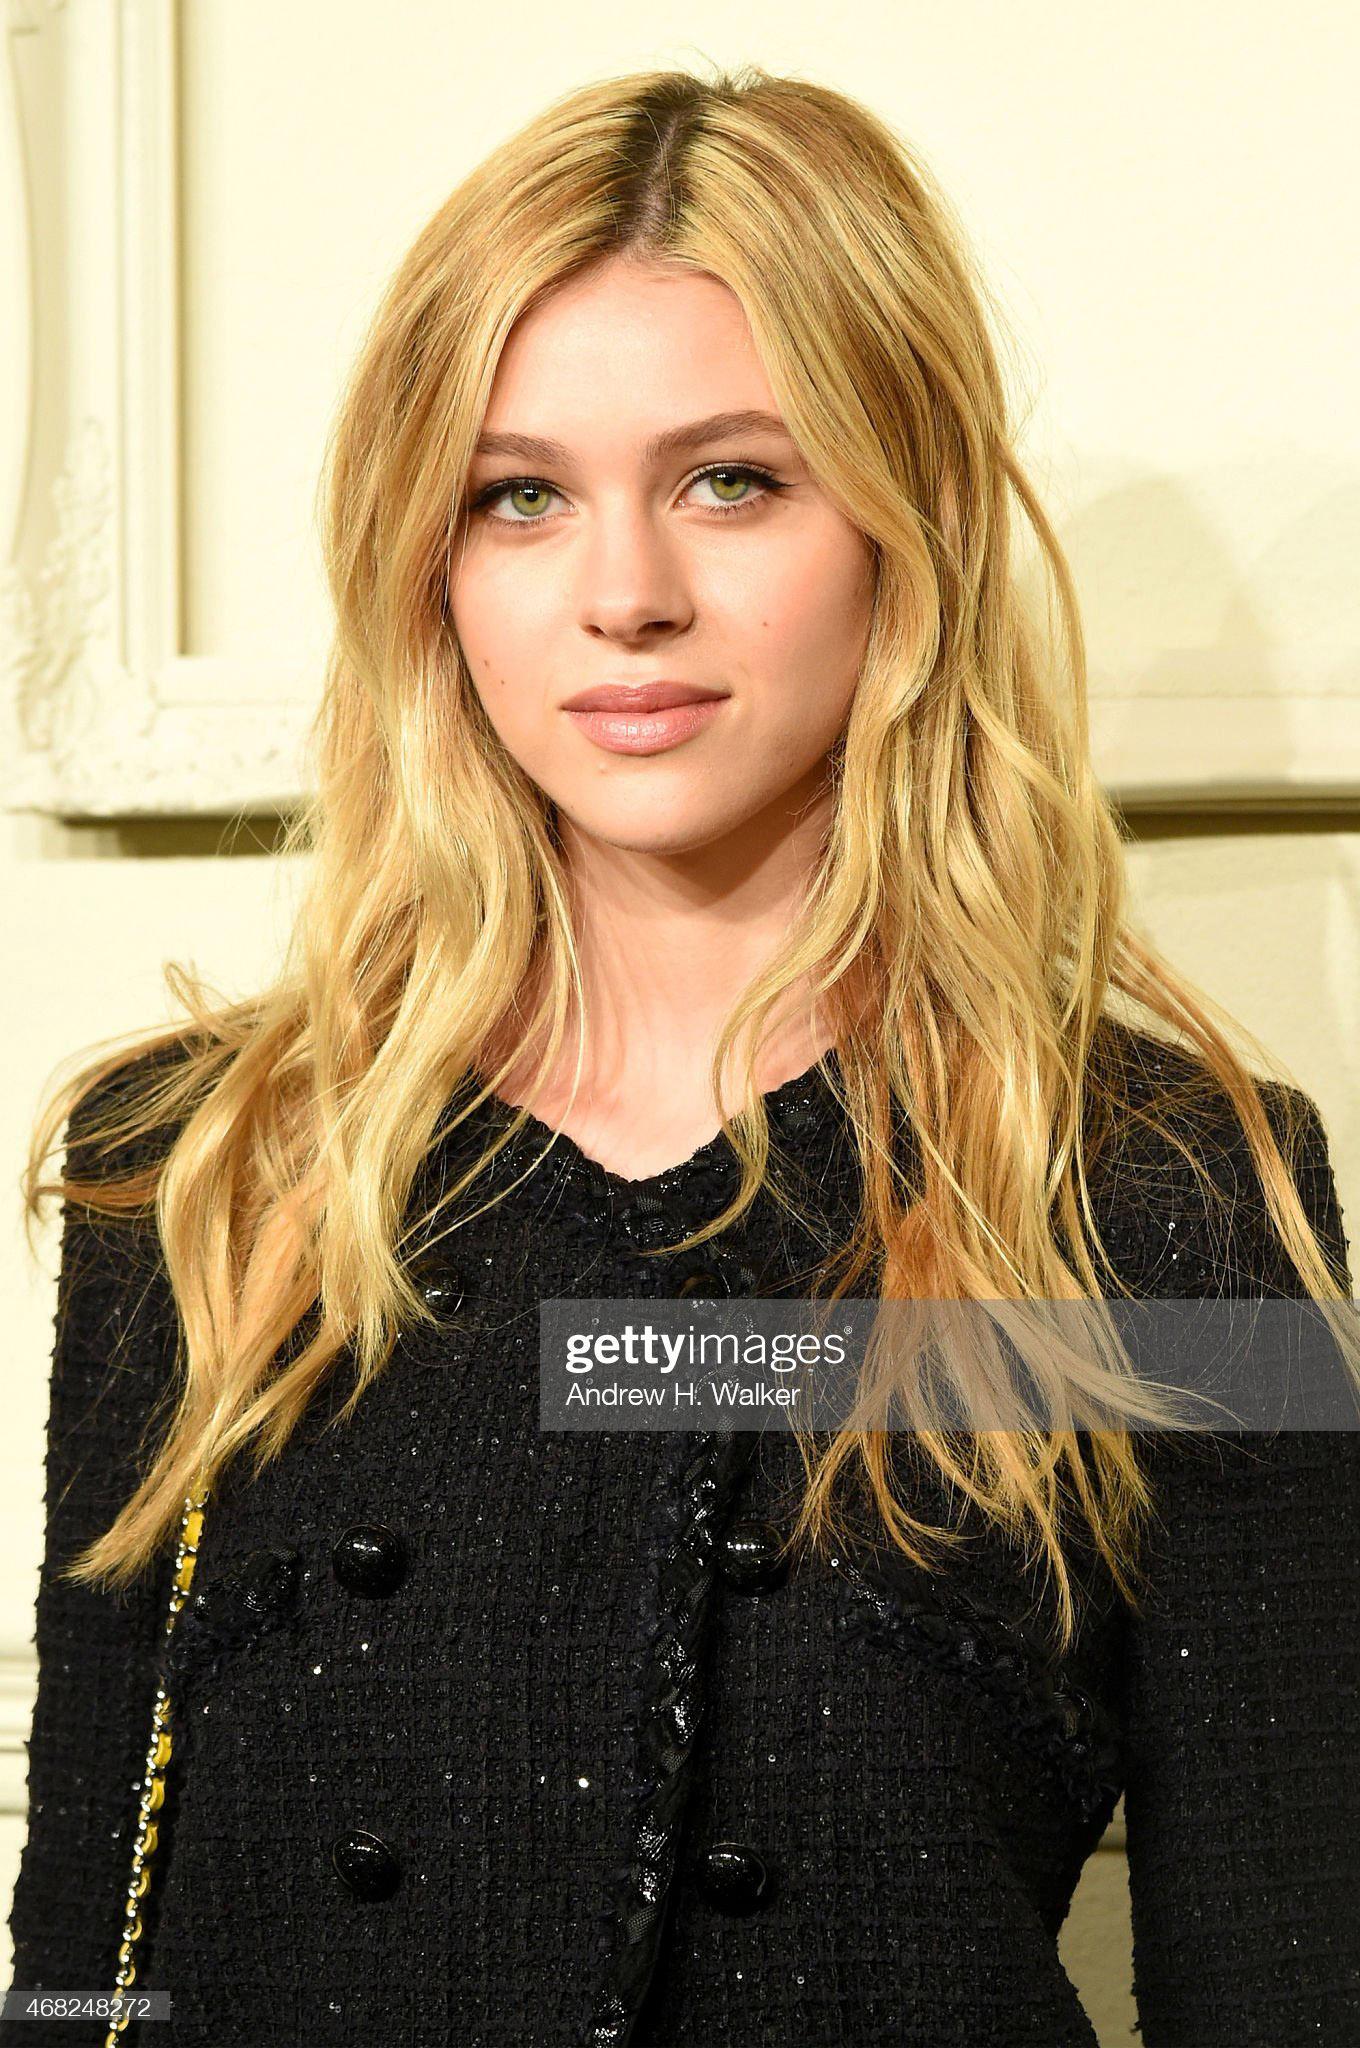 Chanel Nicola Peltz CC Buttons Black Tweed Jacket In Excellent Condition For Sale In Dubai, AE